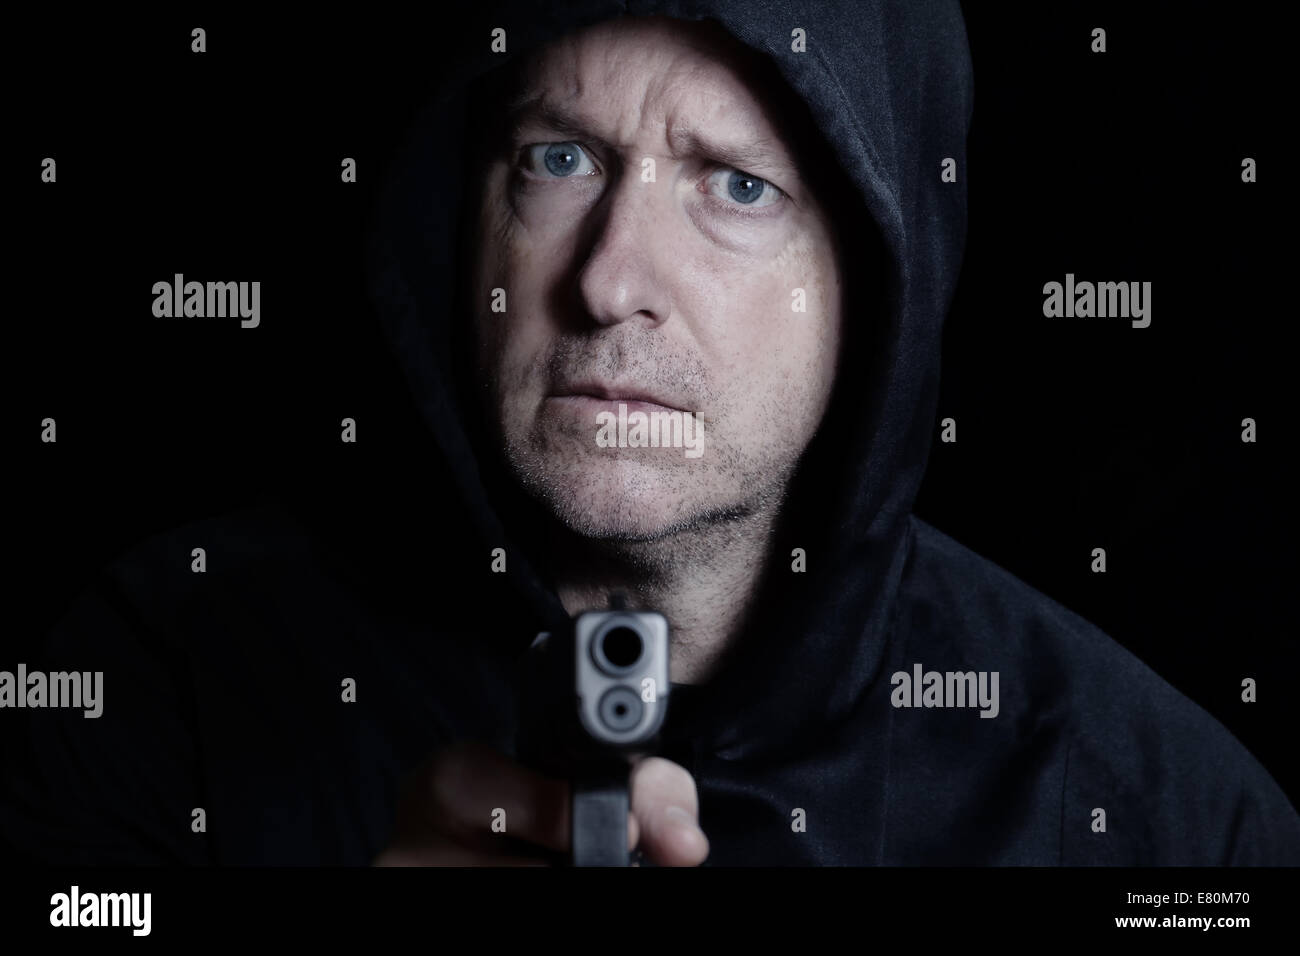 Closeup front view of mature man, looking forward, with gun in hand on black background Stock Photo